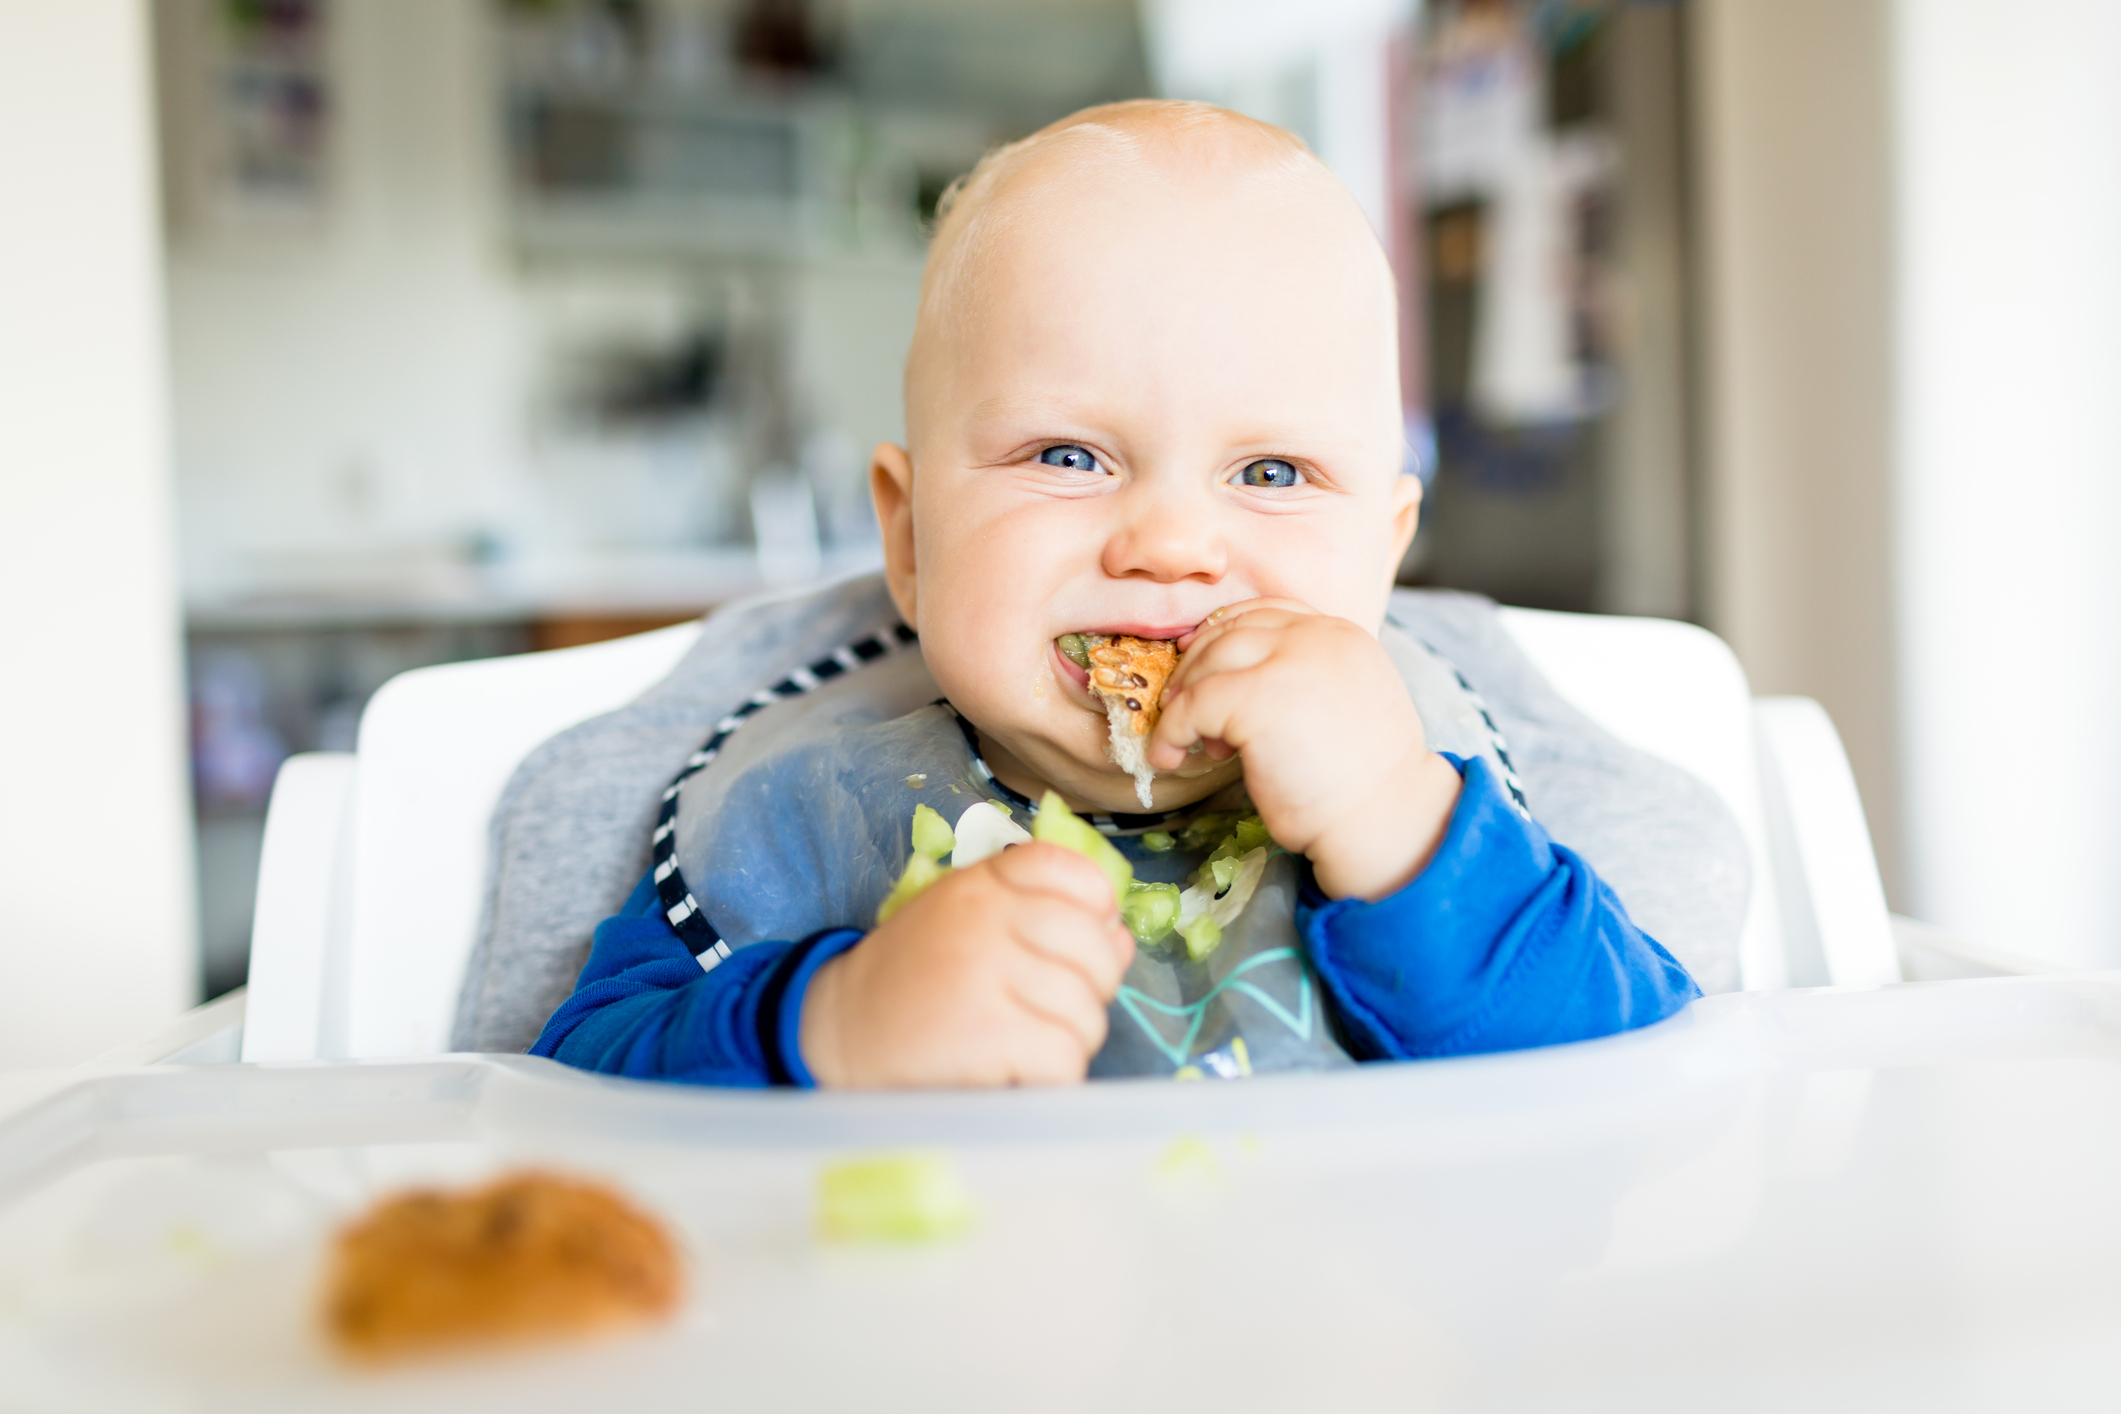 Baby-Led Weaning: Benefits, Foods, and Safety